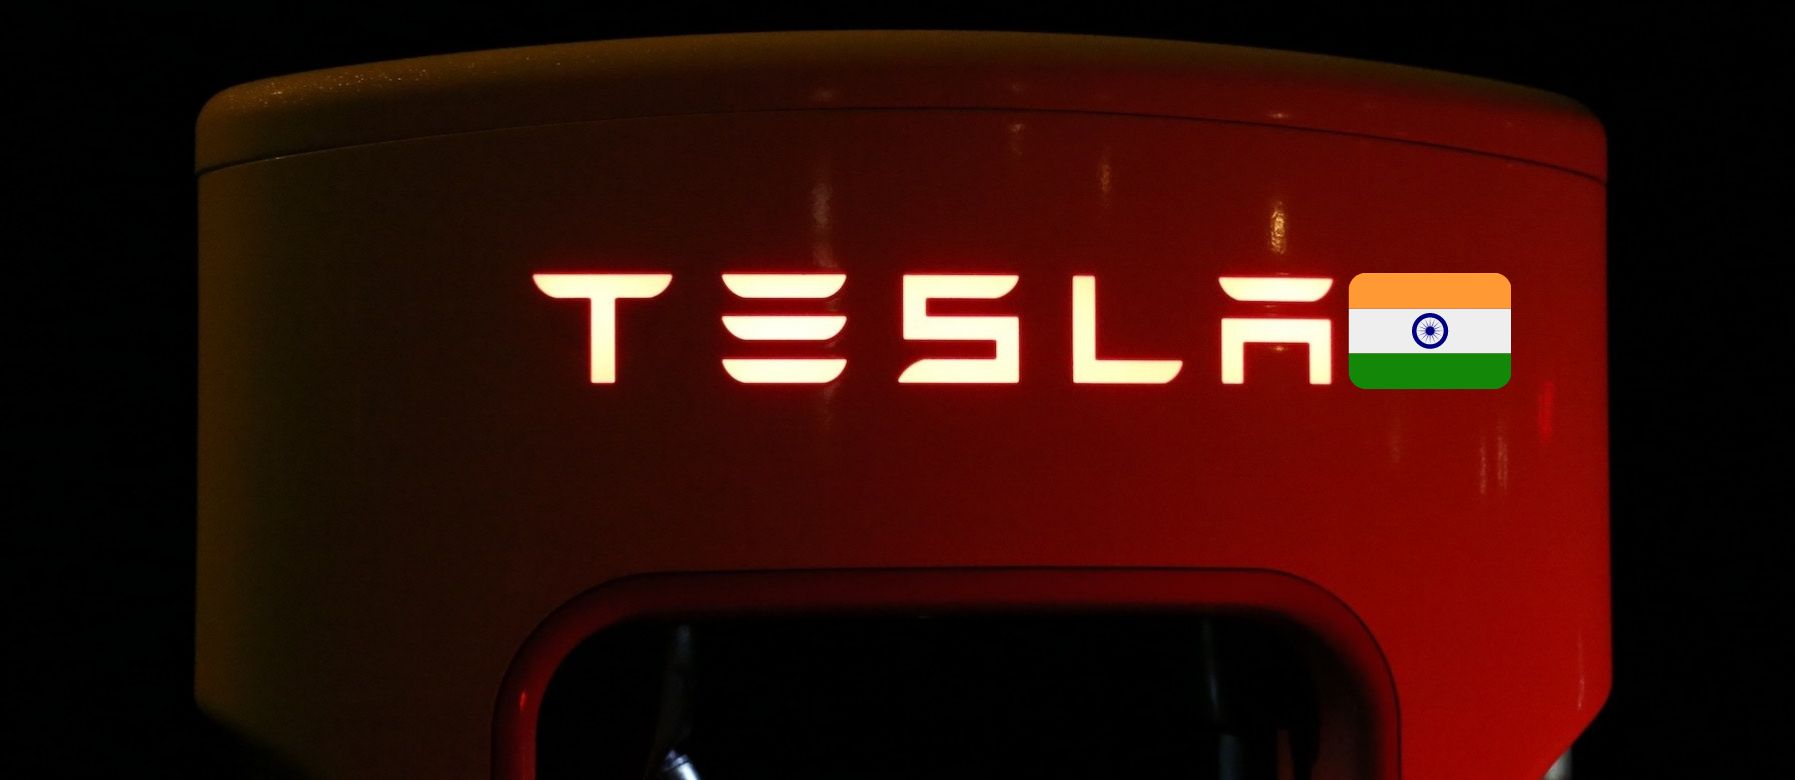 featured image - Why Hasn't Tesla Entered the Indian Market?